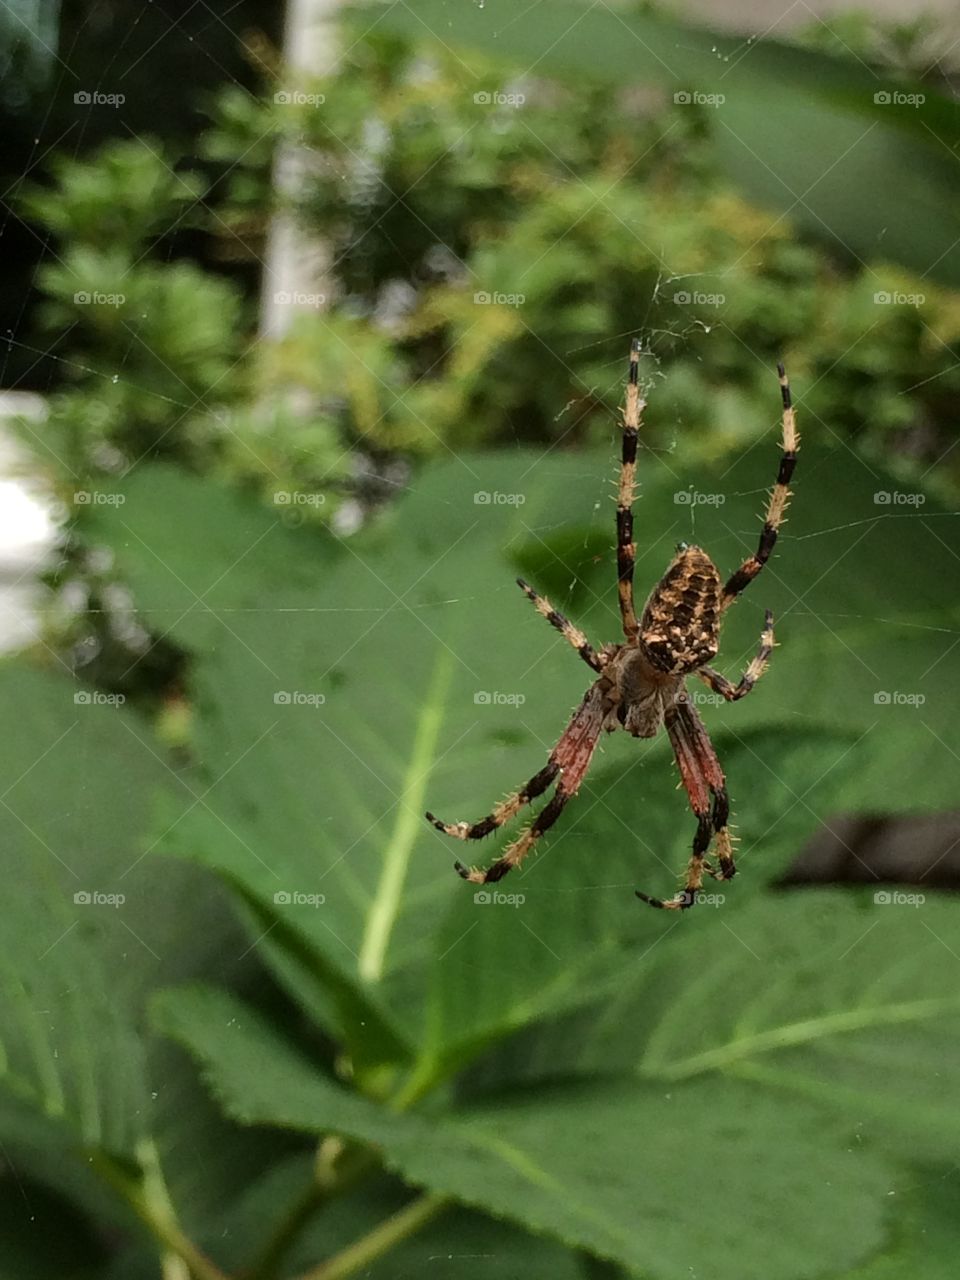 Spider. Almost got tangled in its web!